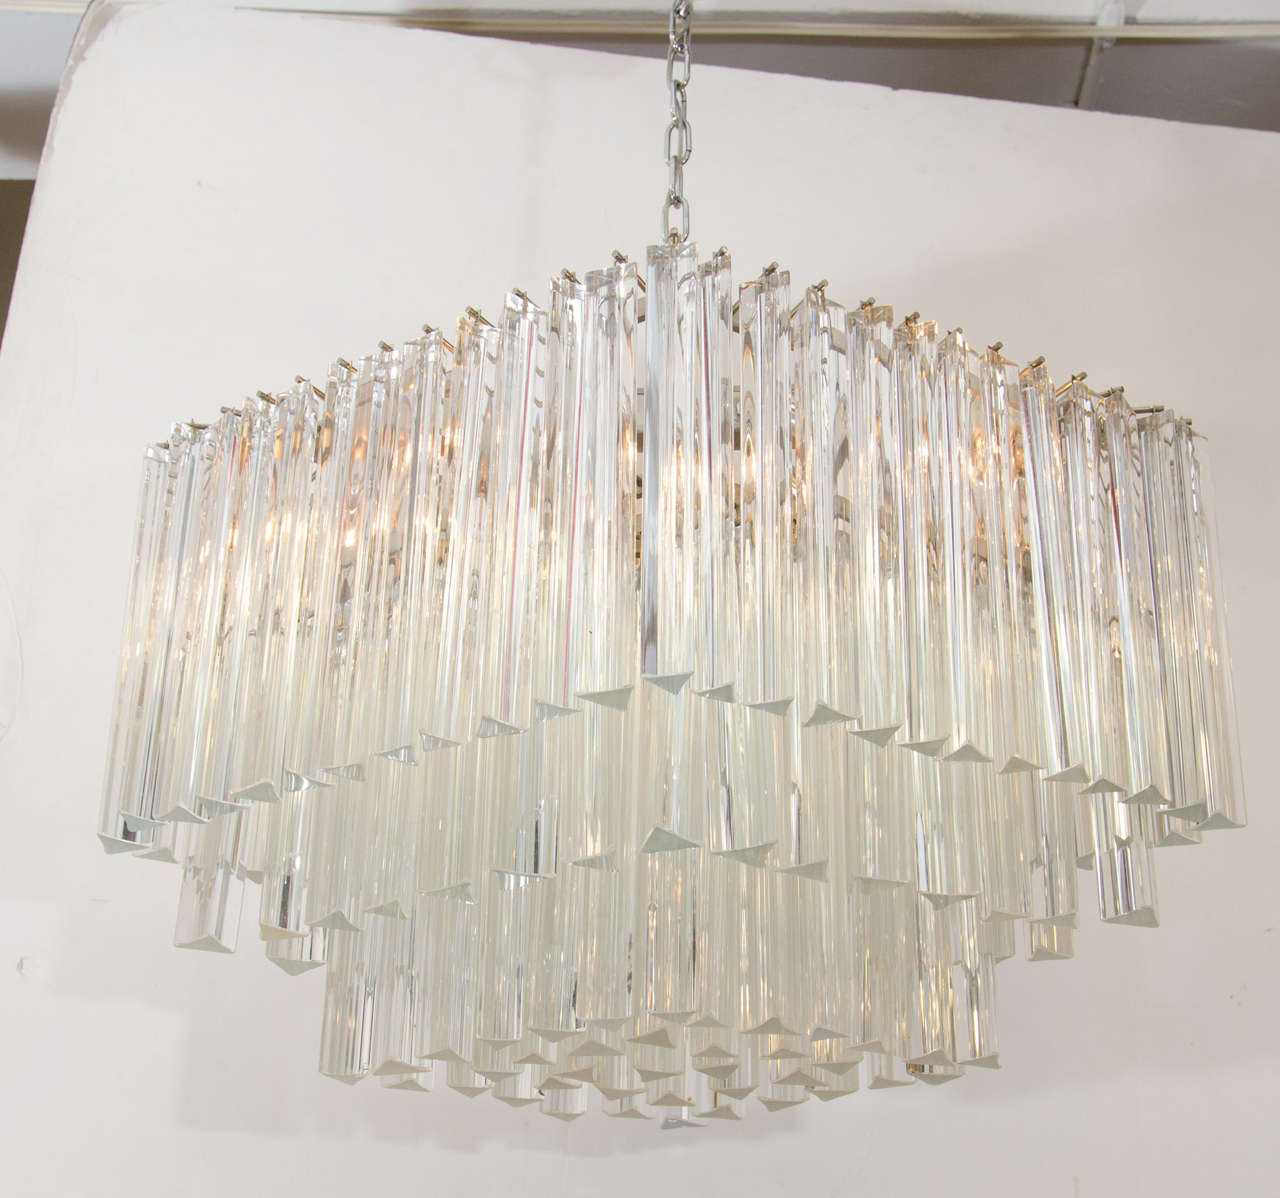 A mid century 1950s three-tiered Italian chandelier by Venini with crystal prisms suspended from a chrome frame. The chandelier drops 24